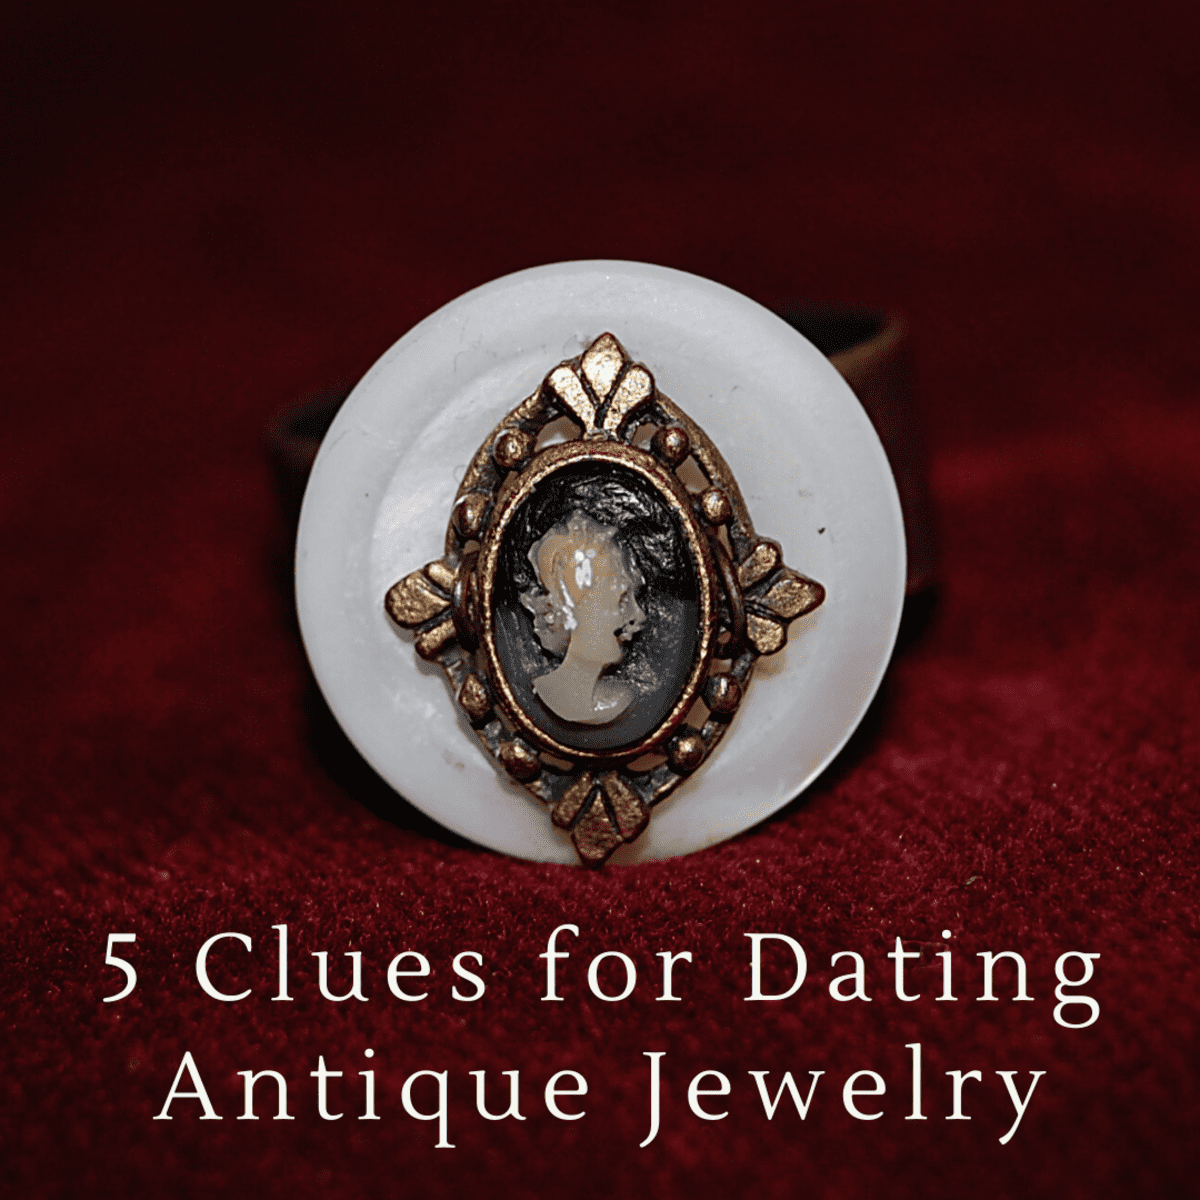 5 Easy Clues for Dating Antique or Vintage Jewelry - HobbyLark